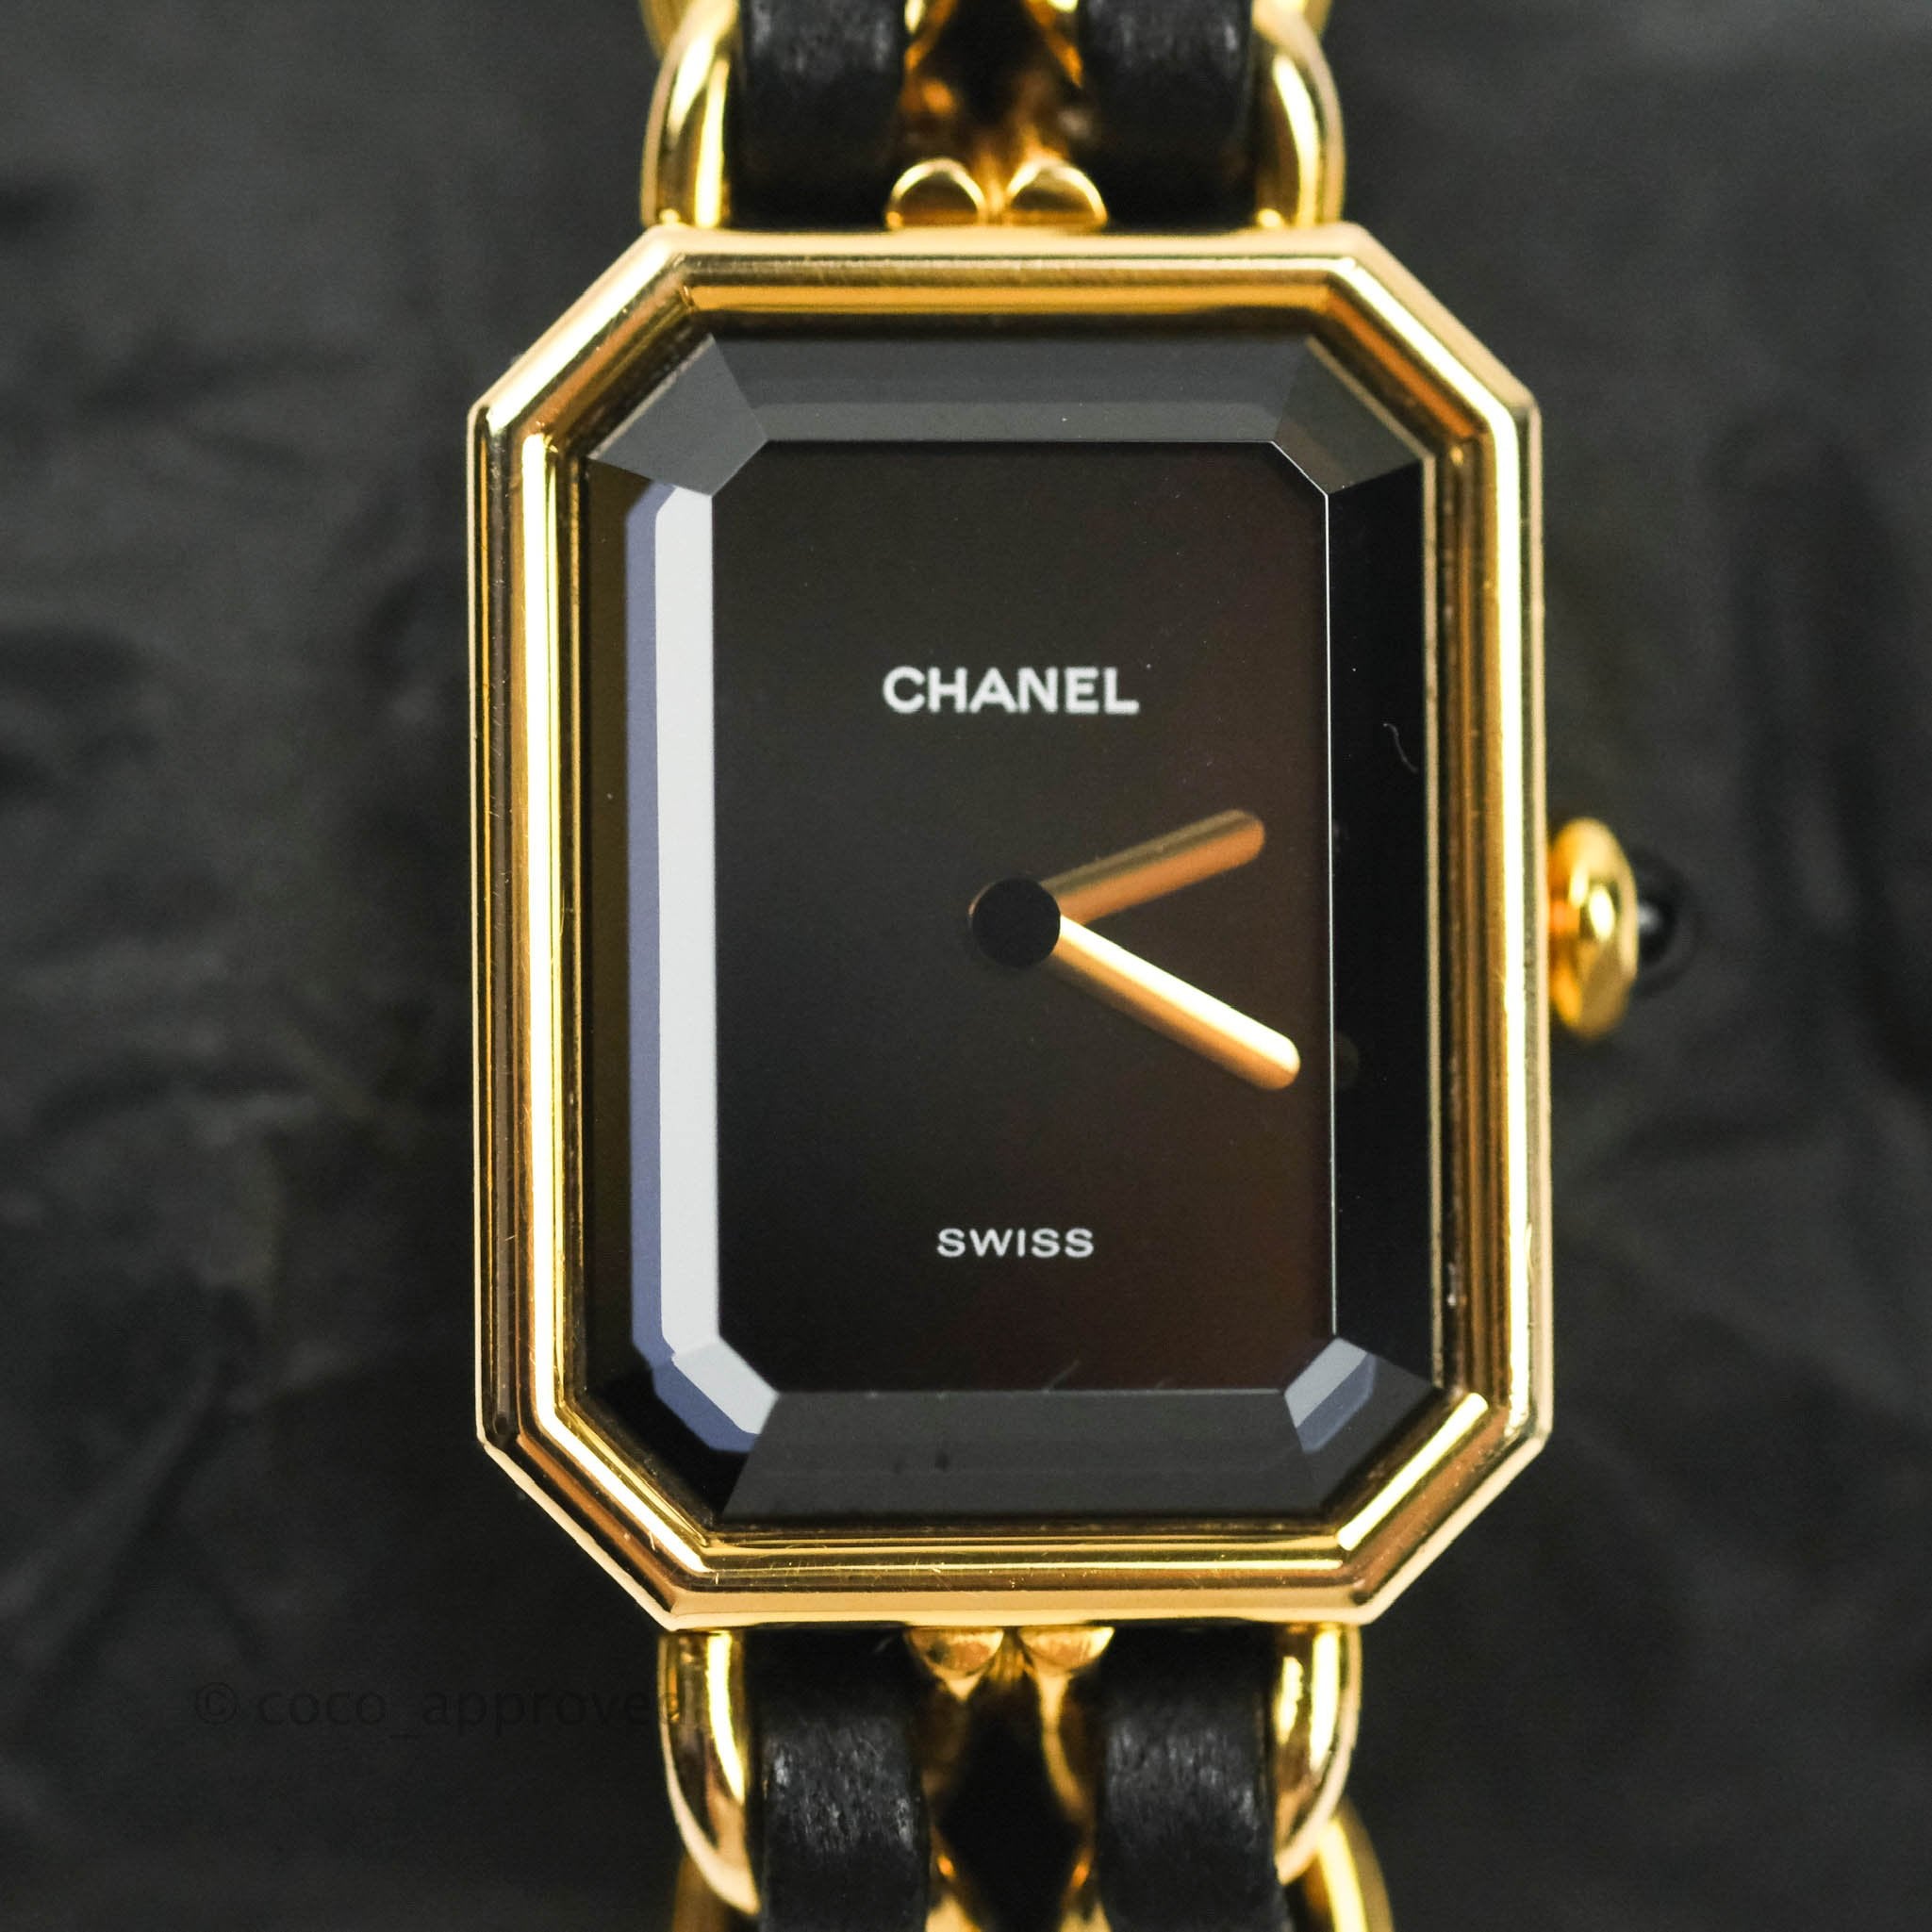 Chanel Reissues Iconic Première Watch to Mark 35th Anniversary – WWD